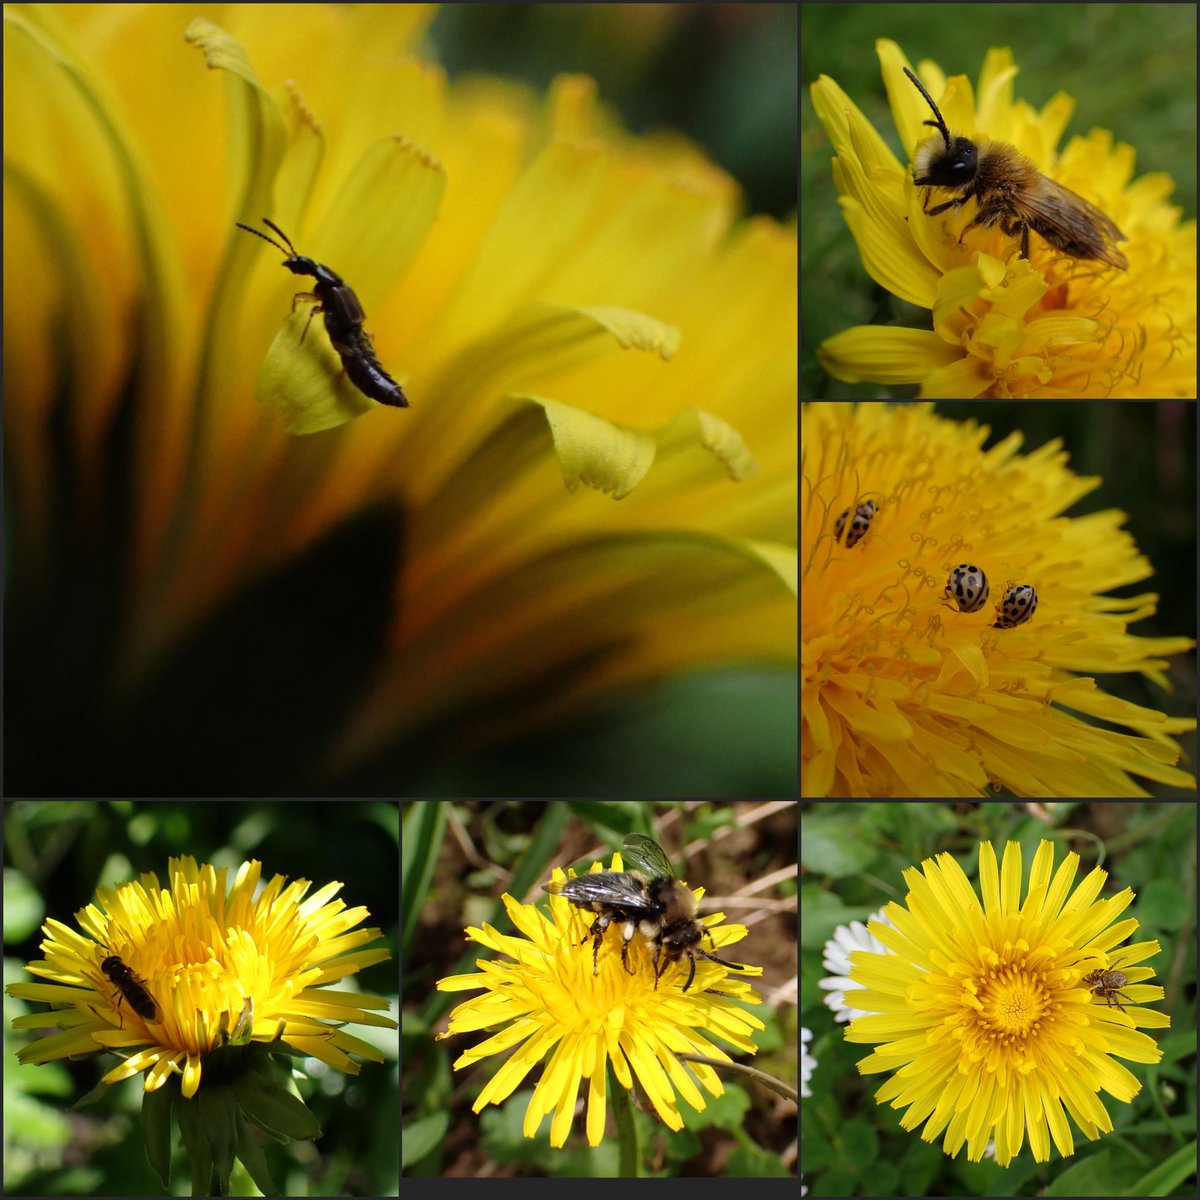 Celebrating all our amazing little creatures this #InsectThursday, very much enjoying the ##dandelions that are a massive lifeline for our #pollinators. Oh and only 3 more sleeps until #InternationalDayOfTheDandelion 🌼